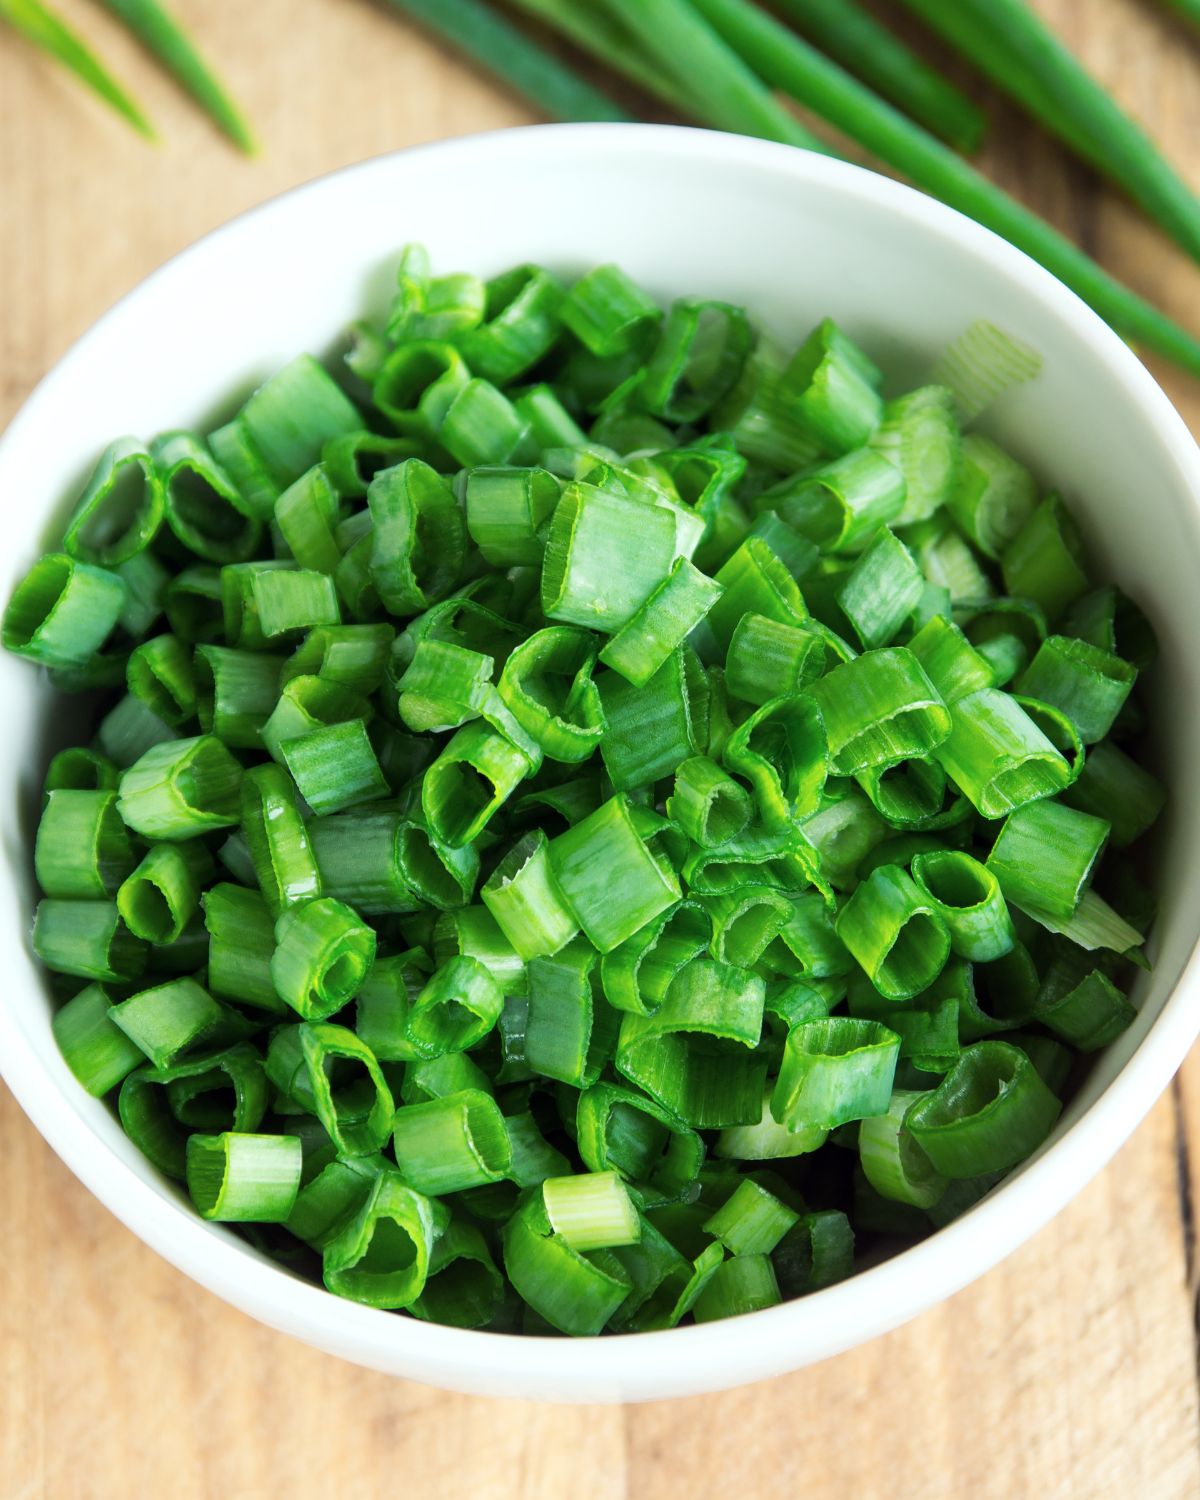 Chopped chives.